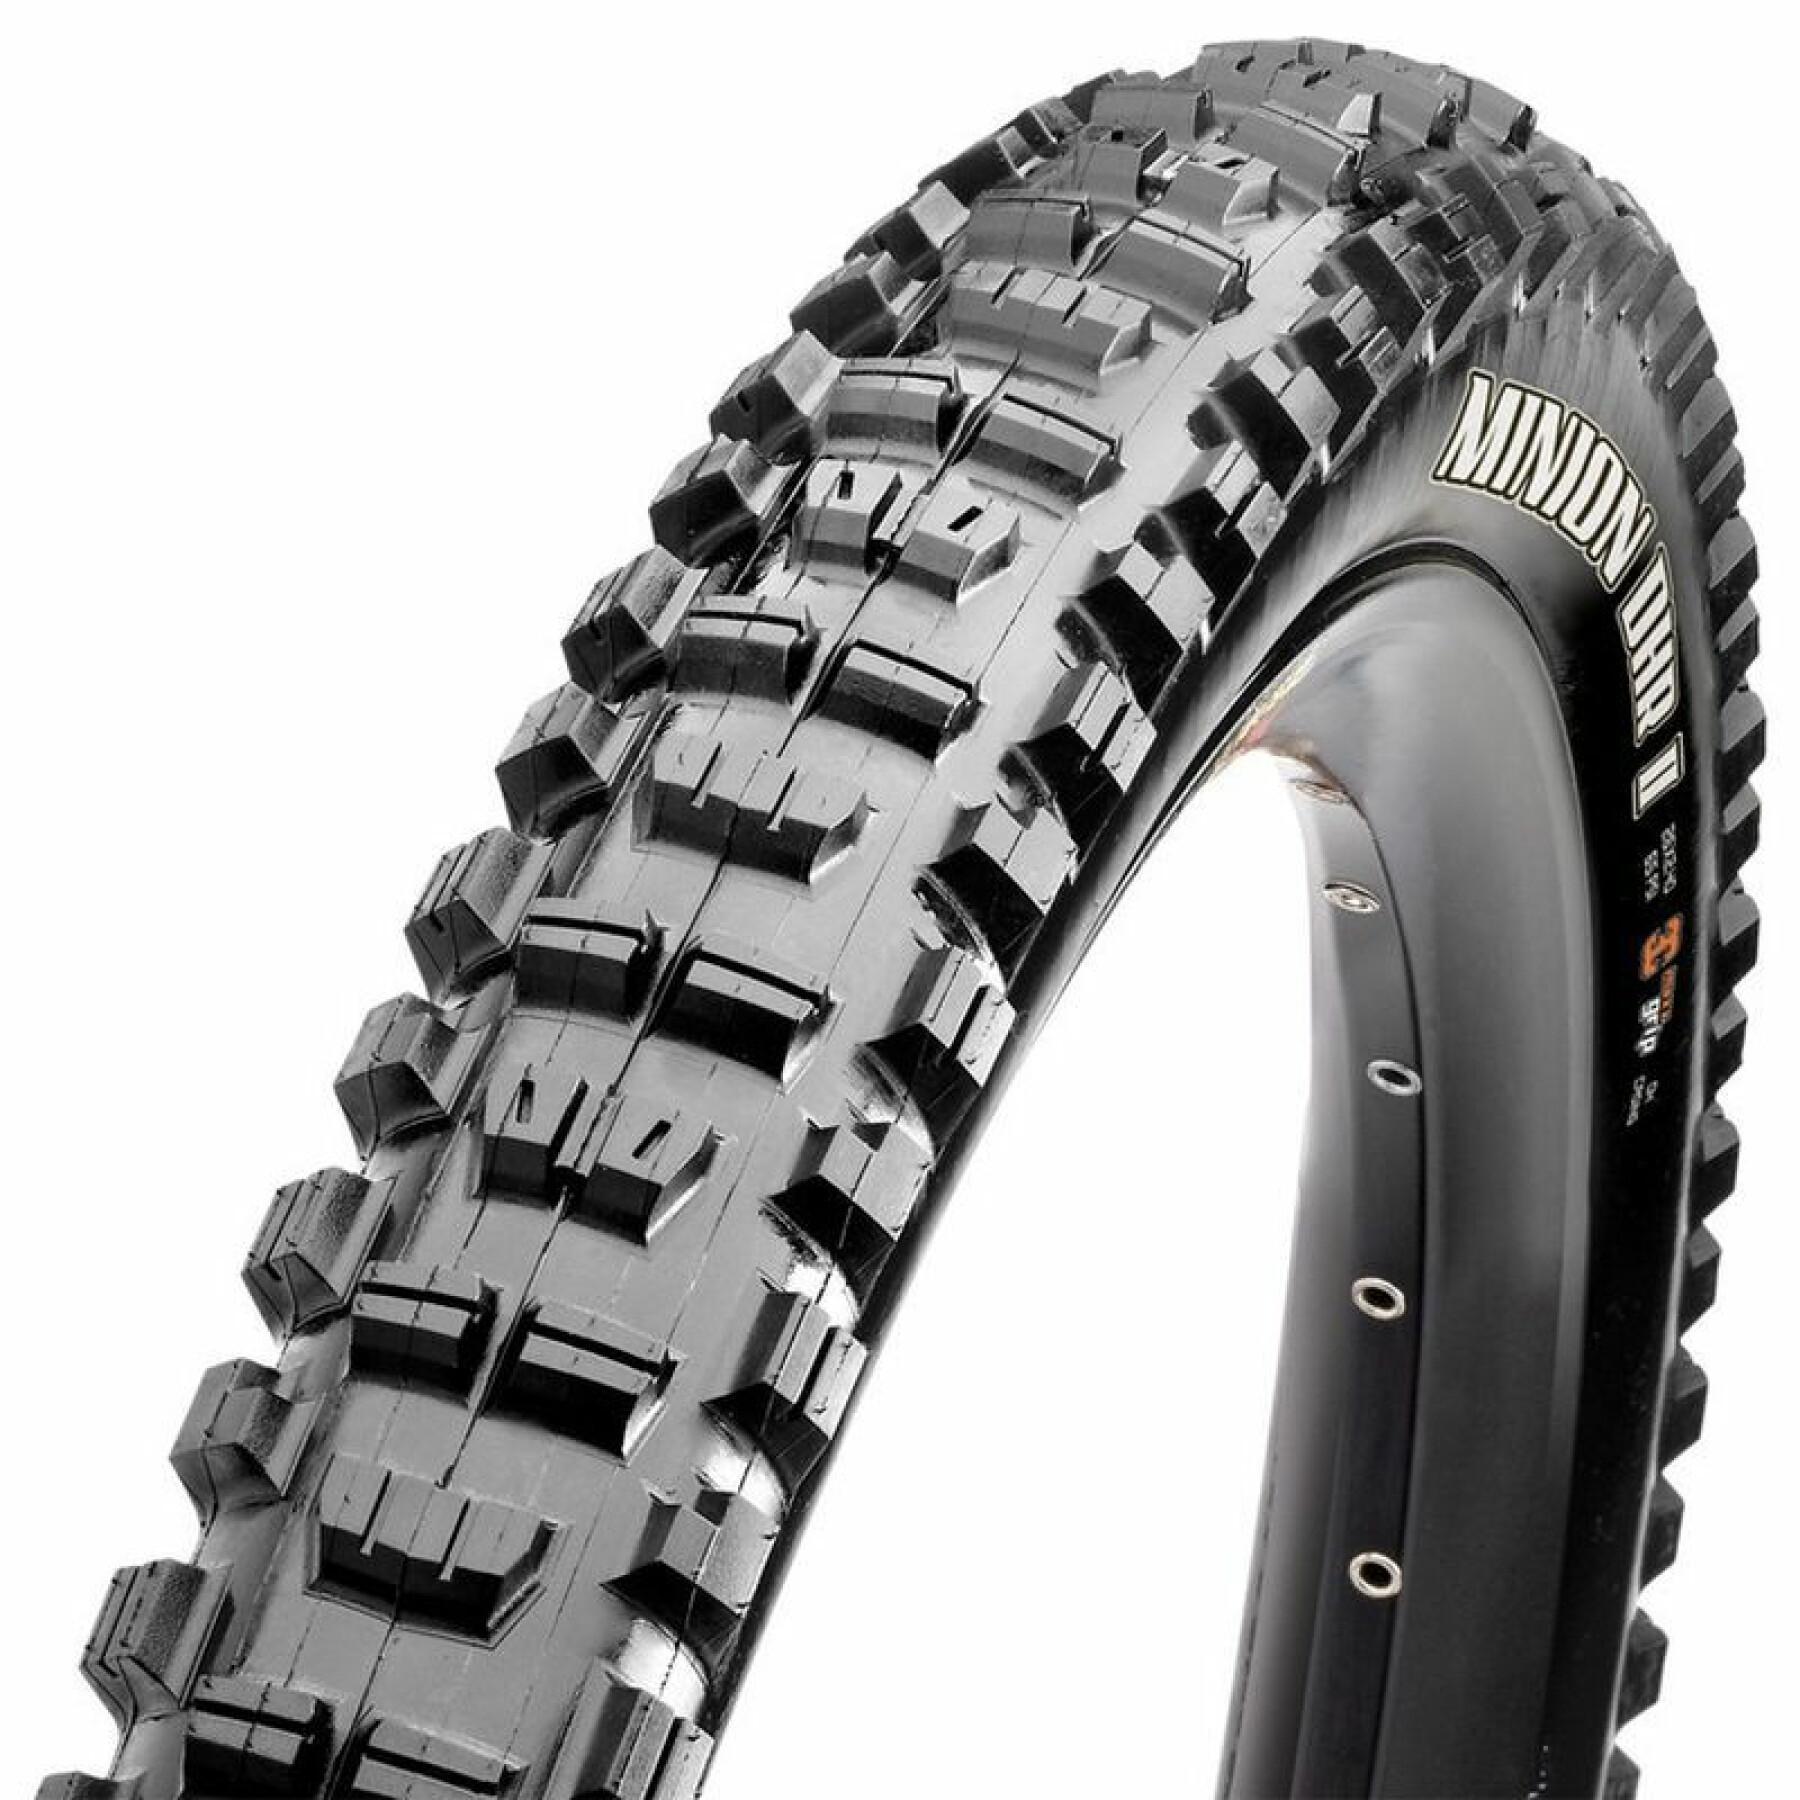 Zachte band Maxxis Minion DHR II Tubeless Ready Exo Dual Compound 27.5x2.30 58-584